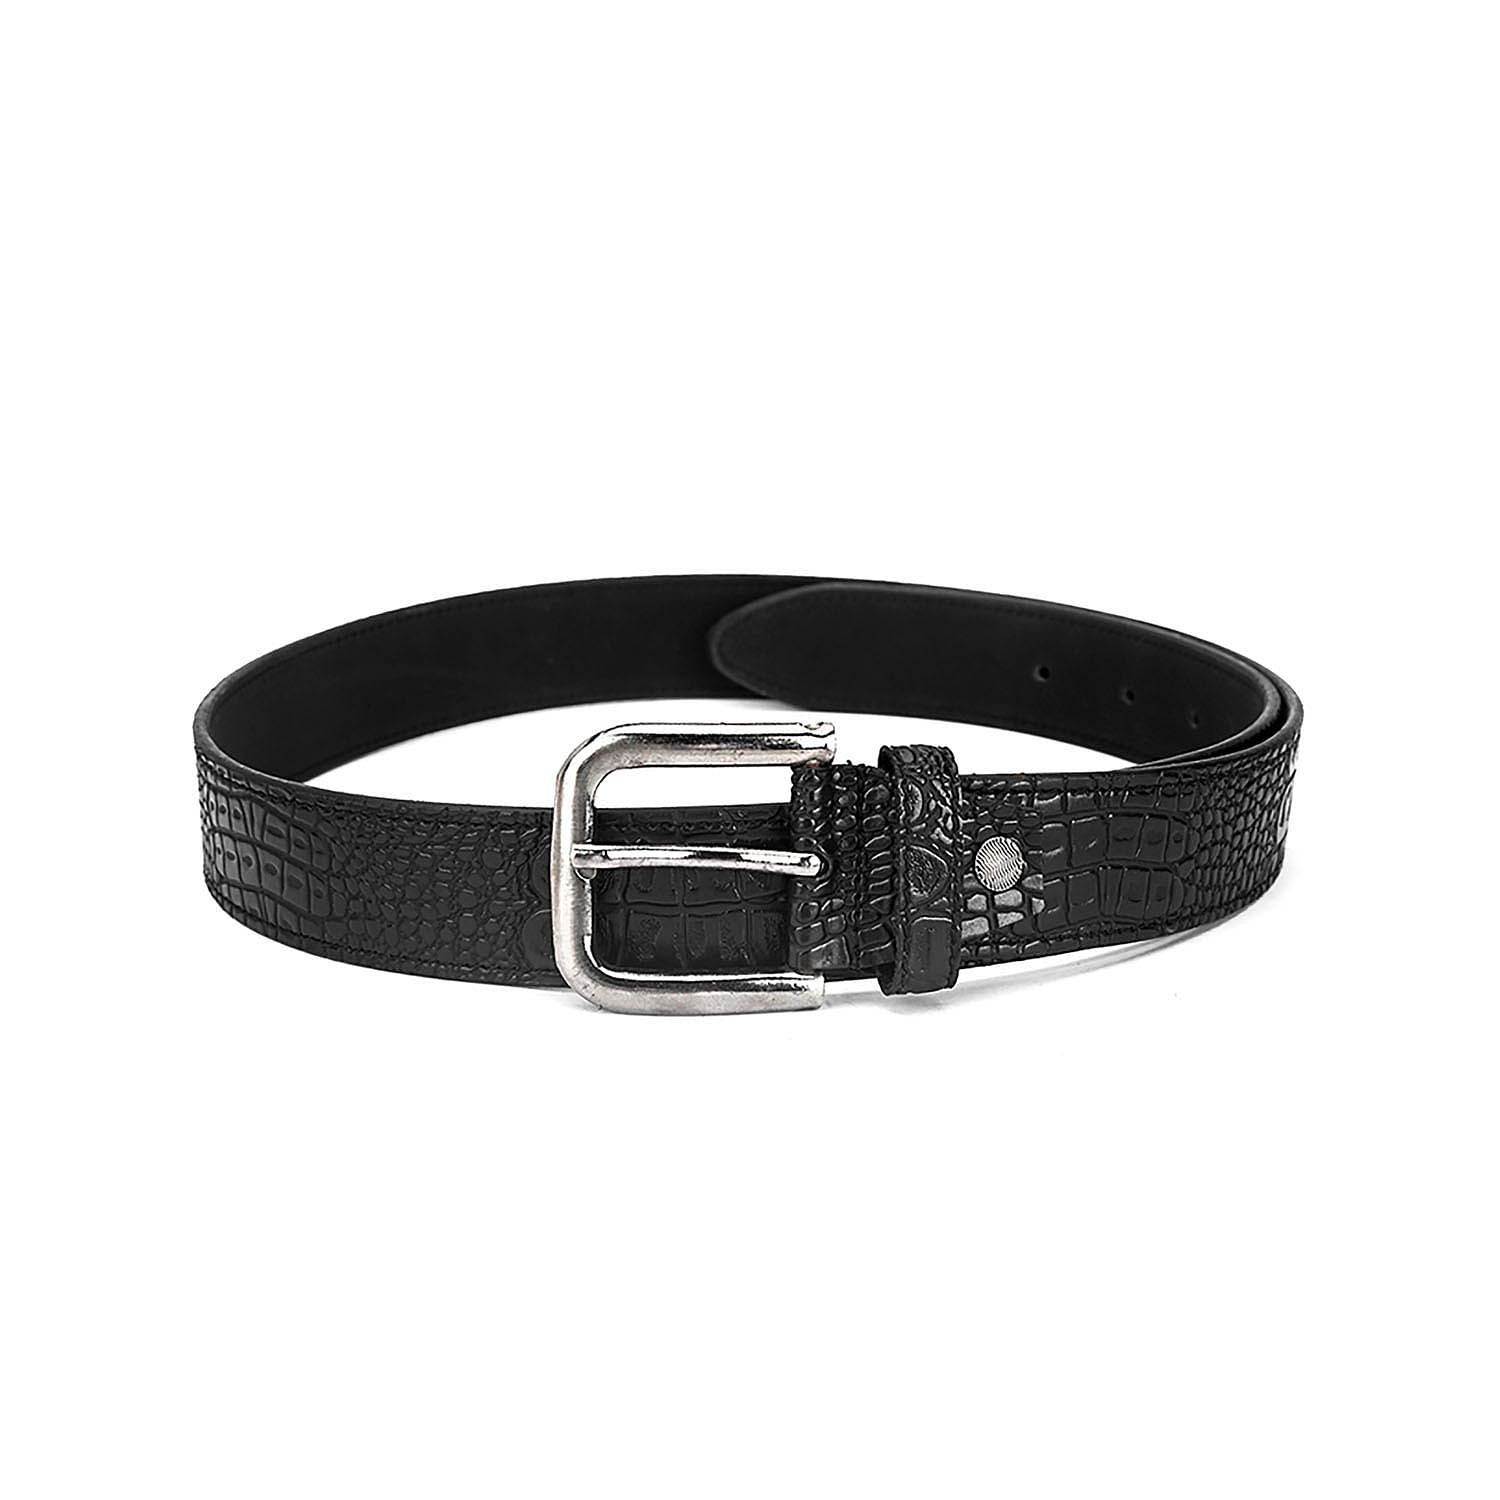 Men's Casual Textured Perforated Belt Black - LZ-CB-101